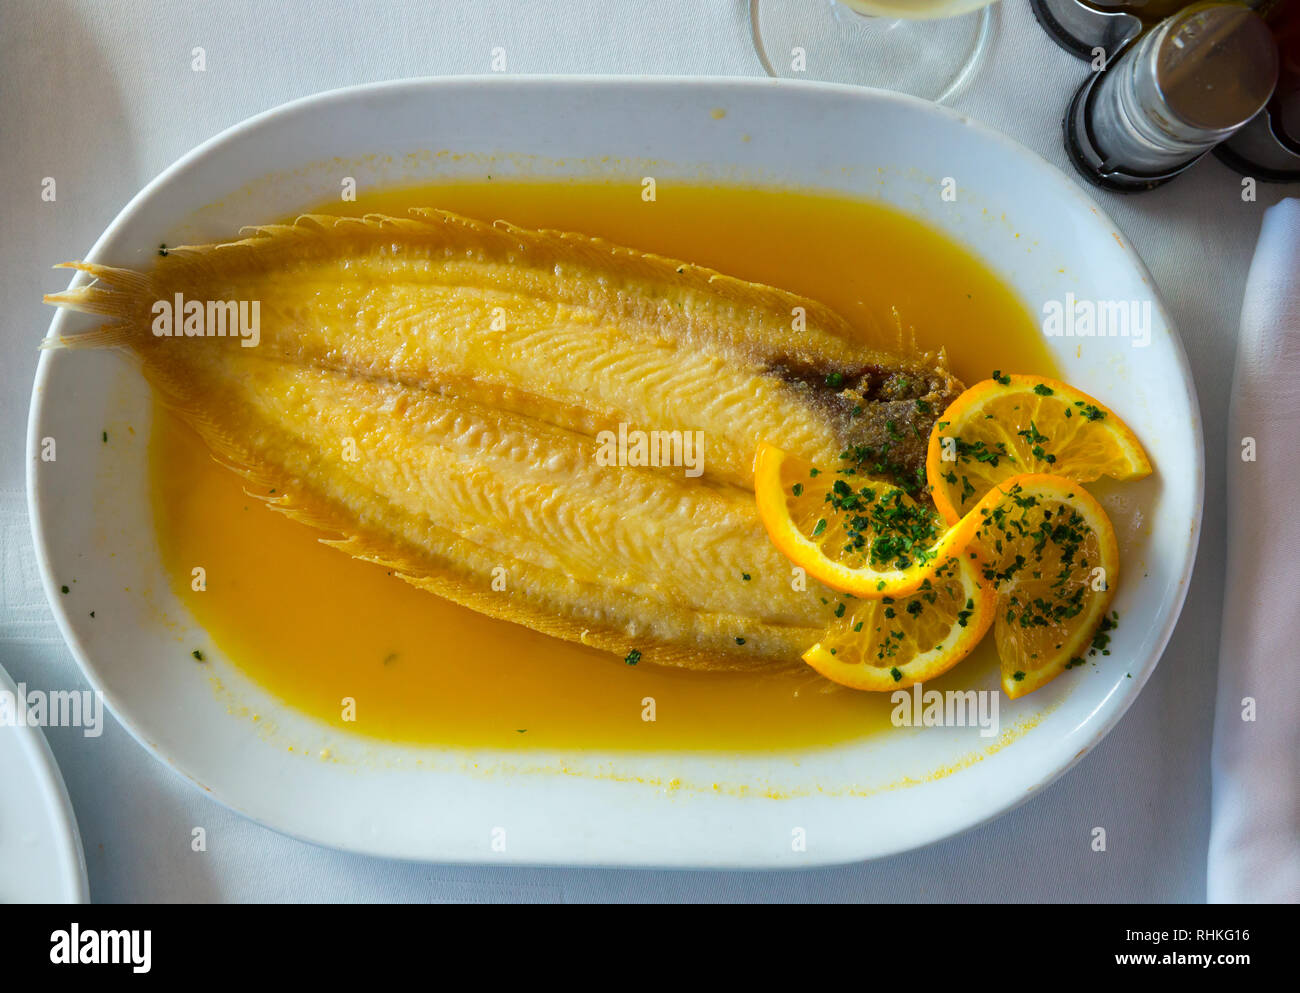 Delicious dover sole cooked in orange sauce served on white plate Stock Photo